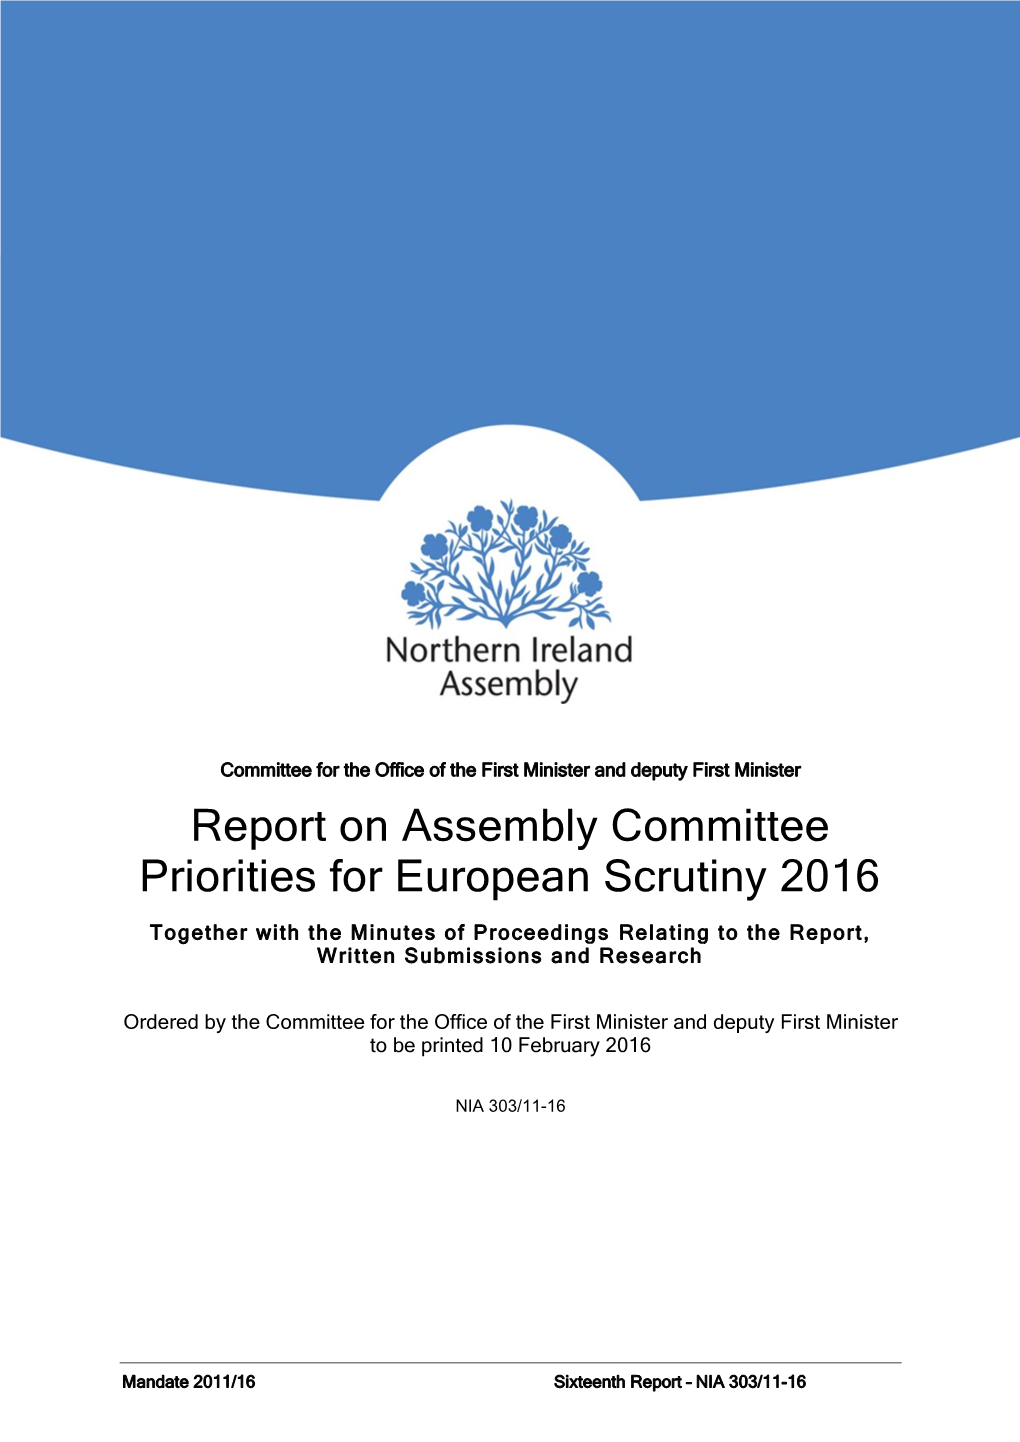 Report on Assembly Committee Priorities for European Scrutiny 2016